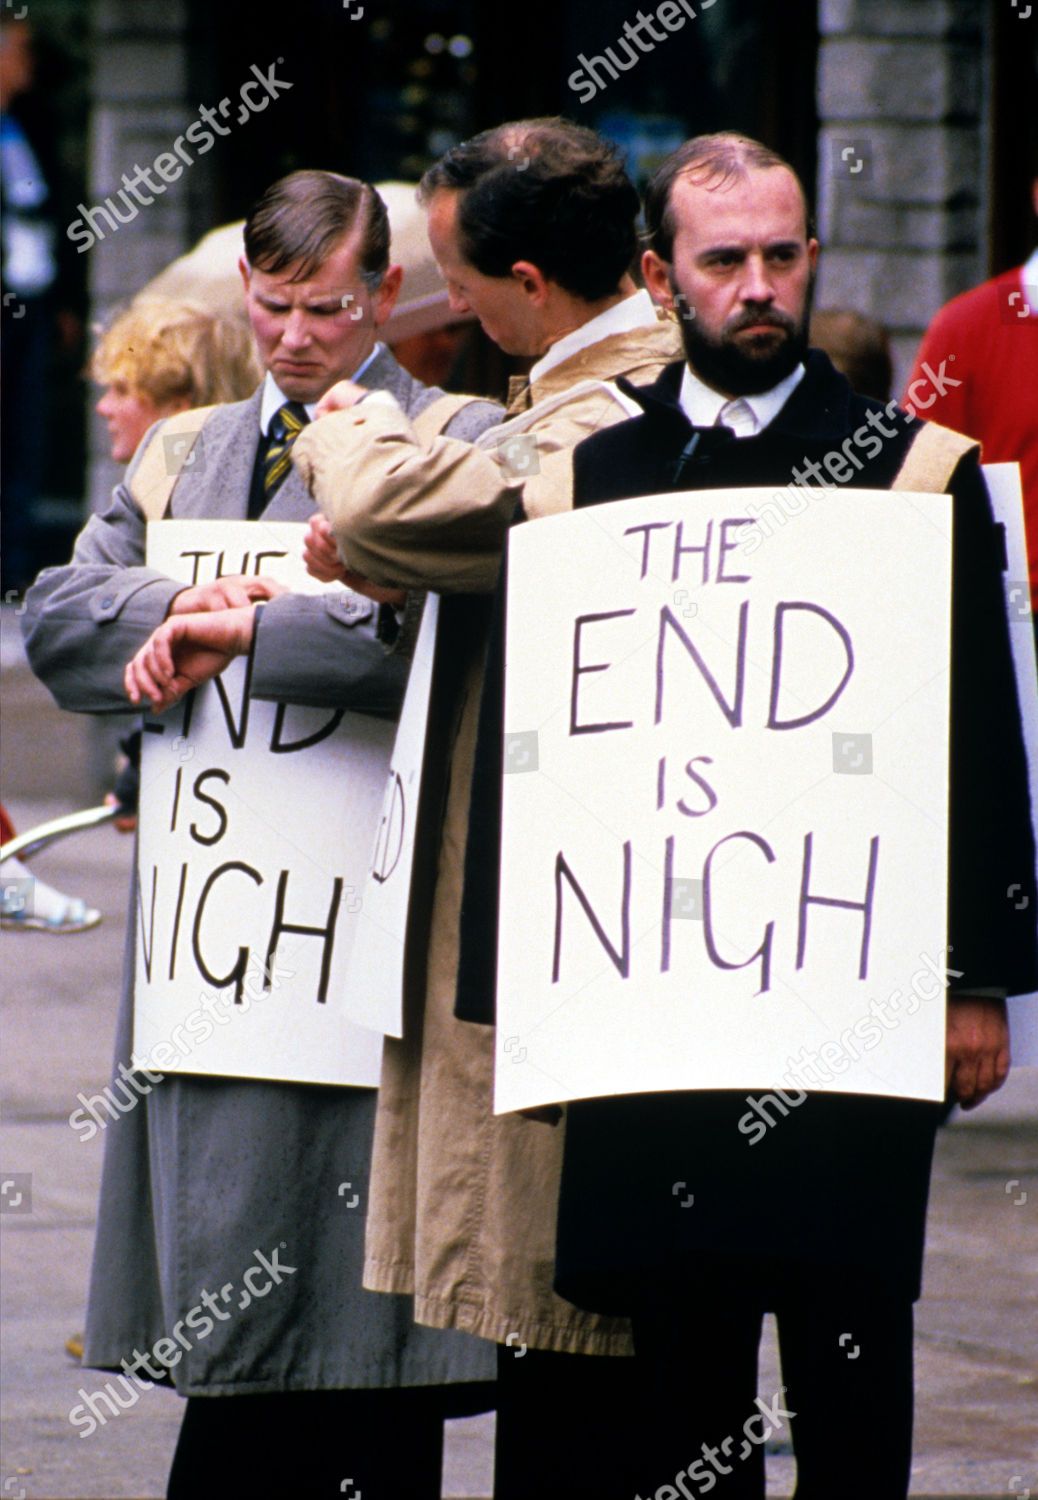 the-end-is-nigh-sign-on-a-sandwich-board-1986-shutterstock-editorial-127670d.jpg